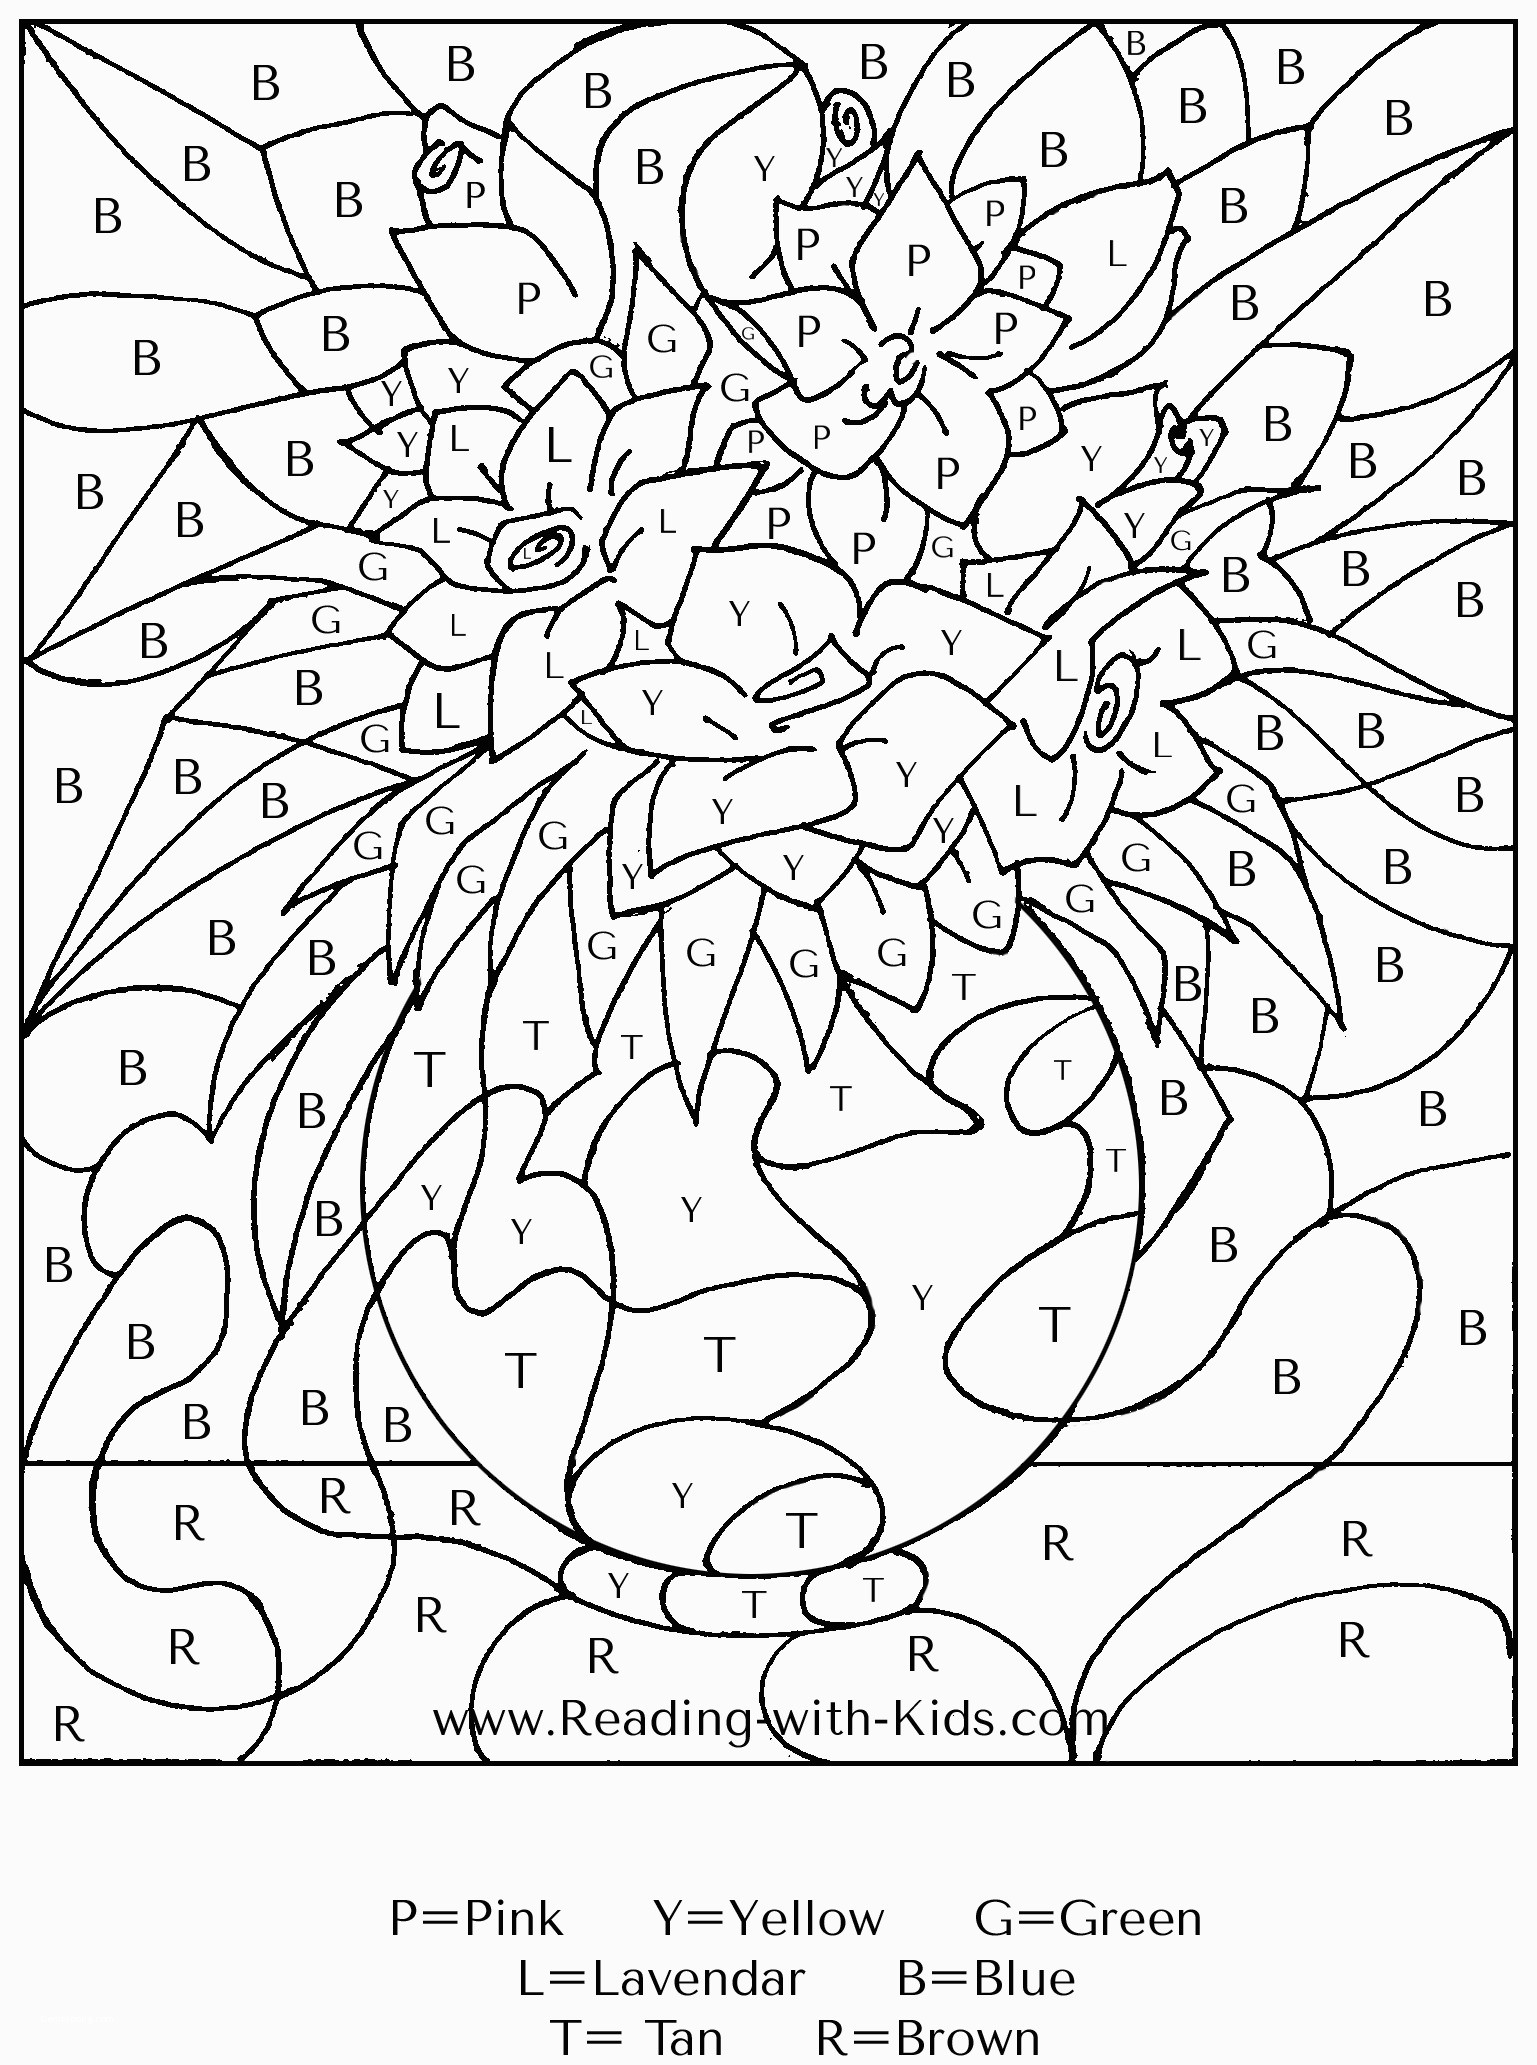 Stunning Coloring Pages Fors With Numbers Image Ideas Free Online ...